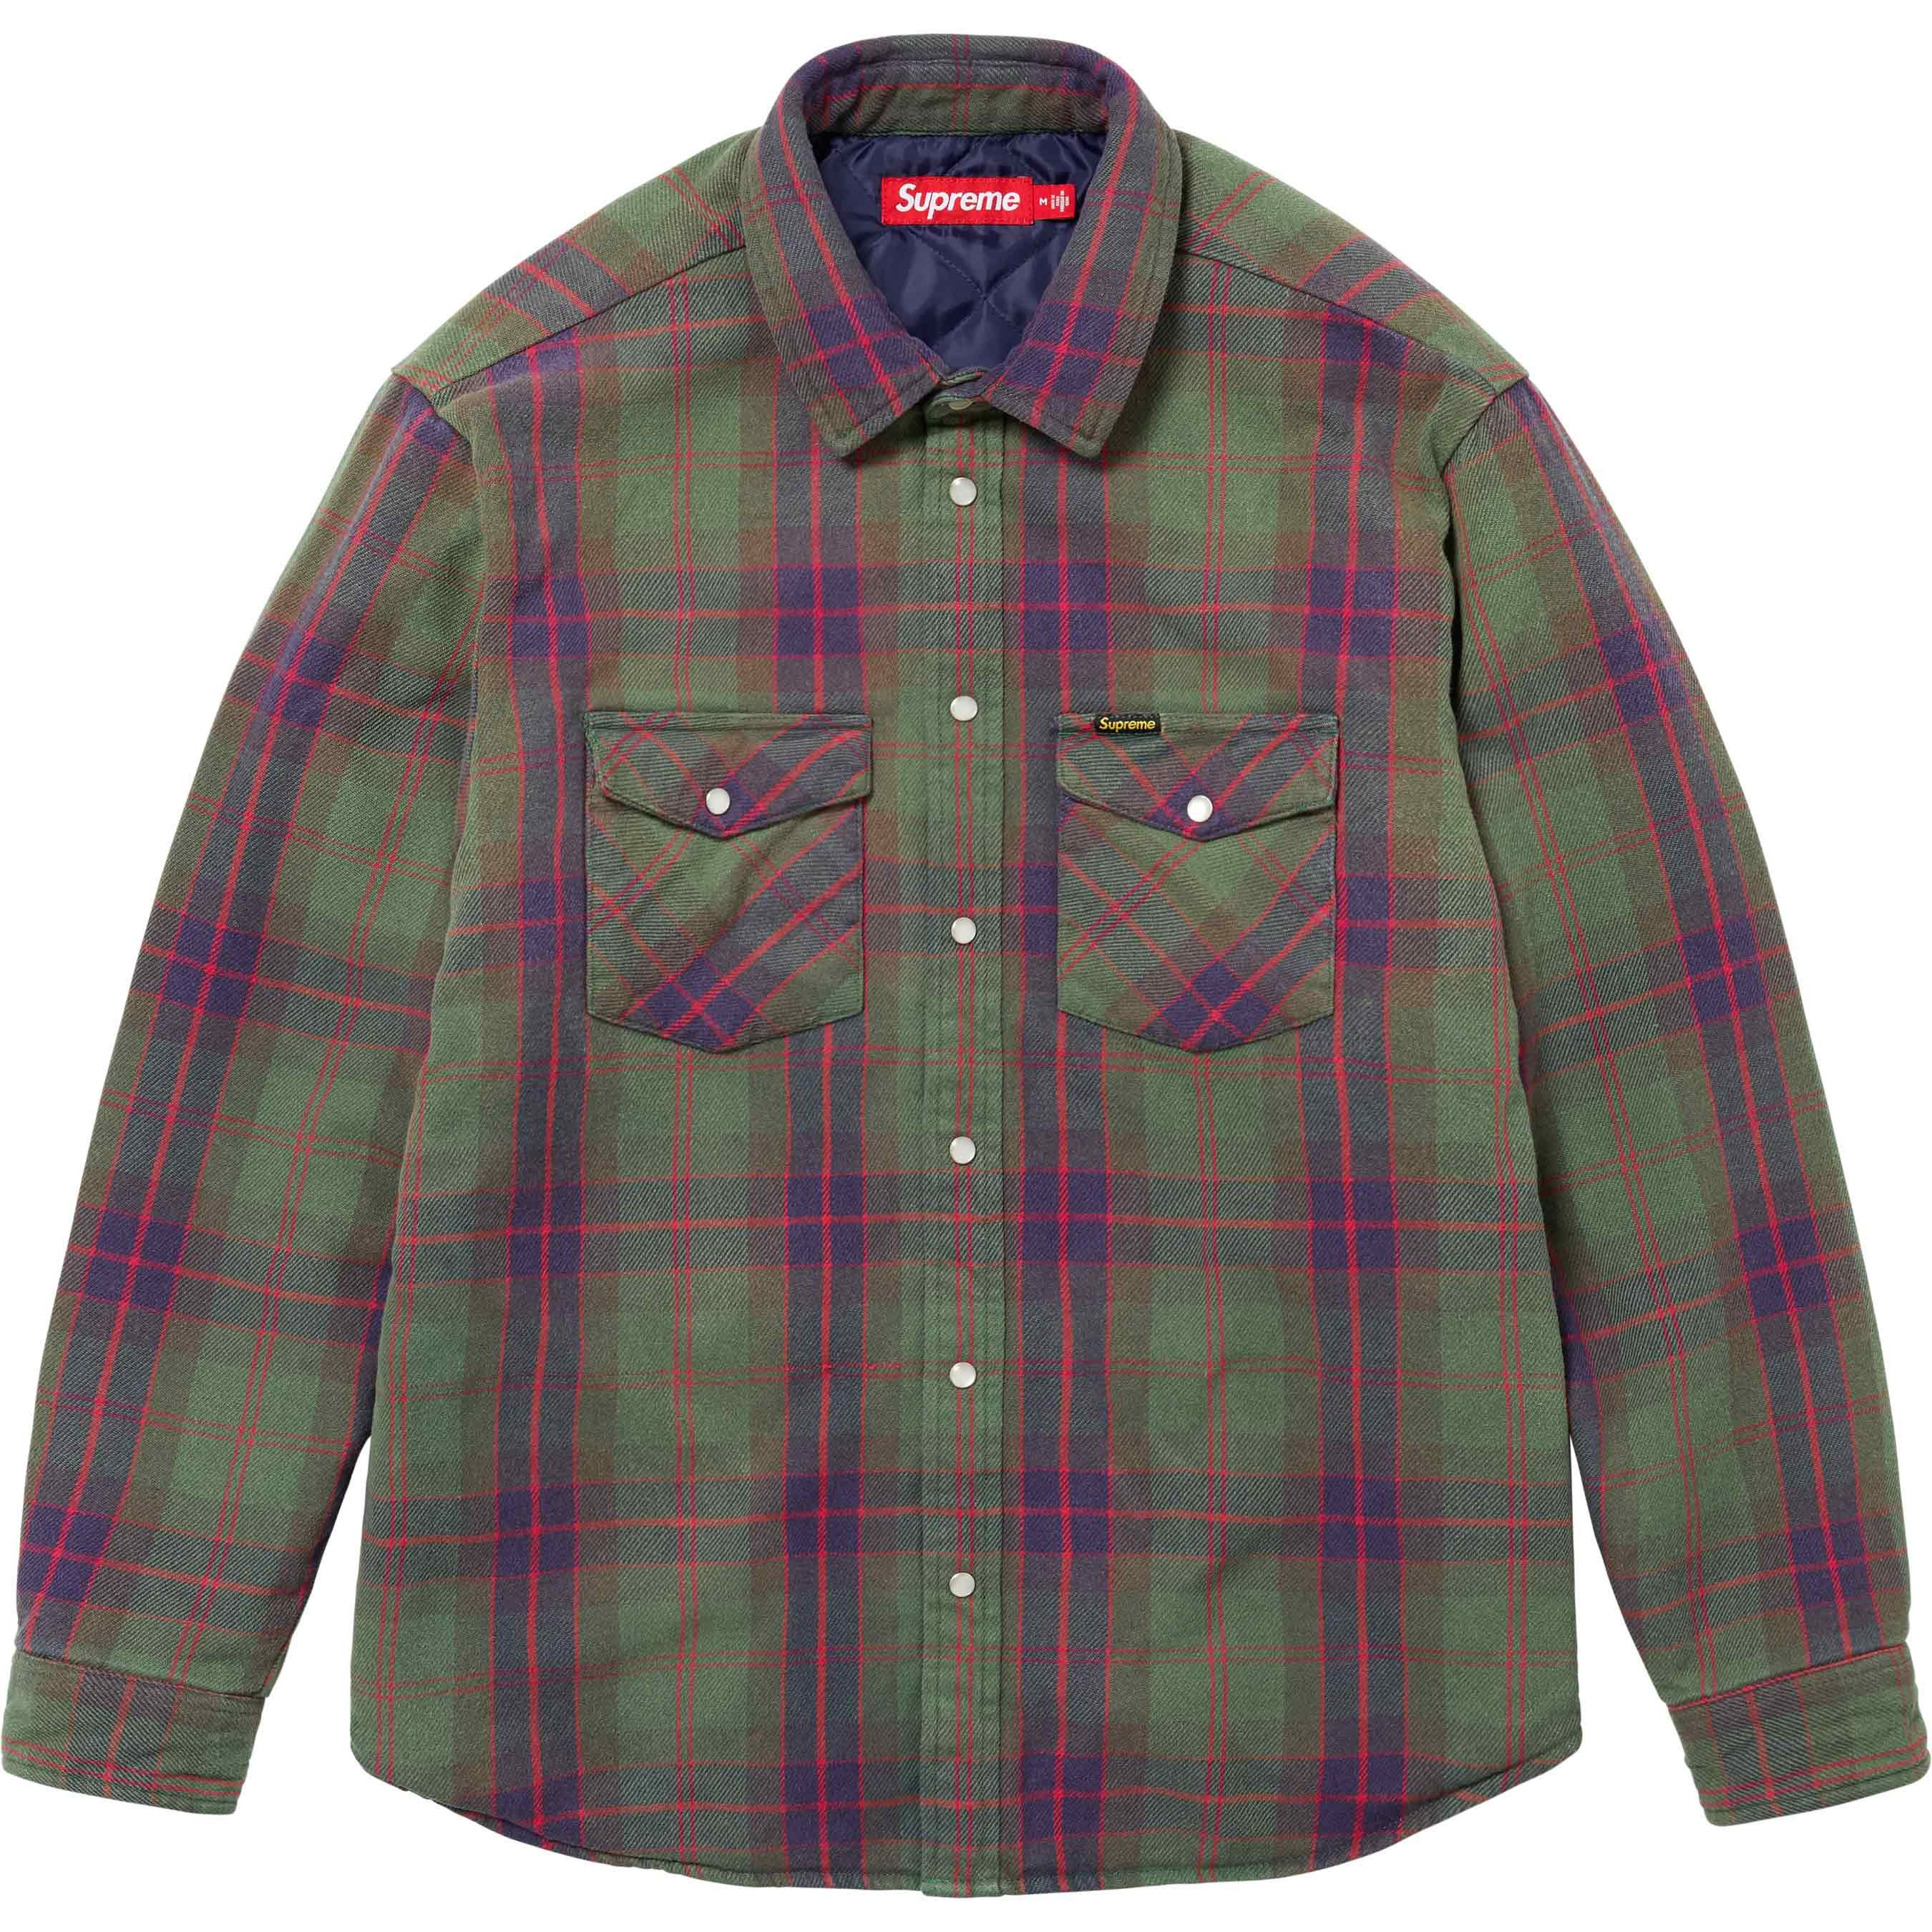 Supreme QUILTED FLANNEL SNAP SHIRT | Grailed